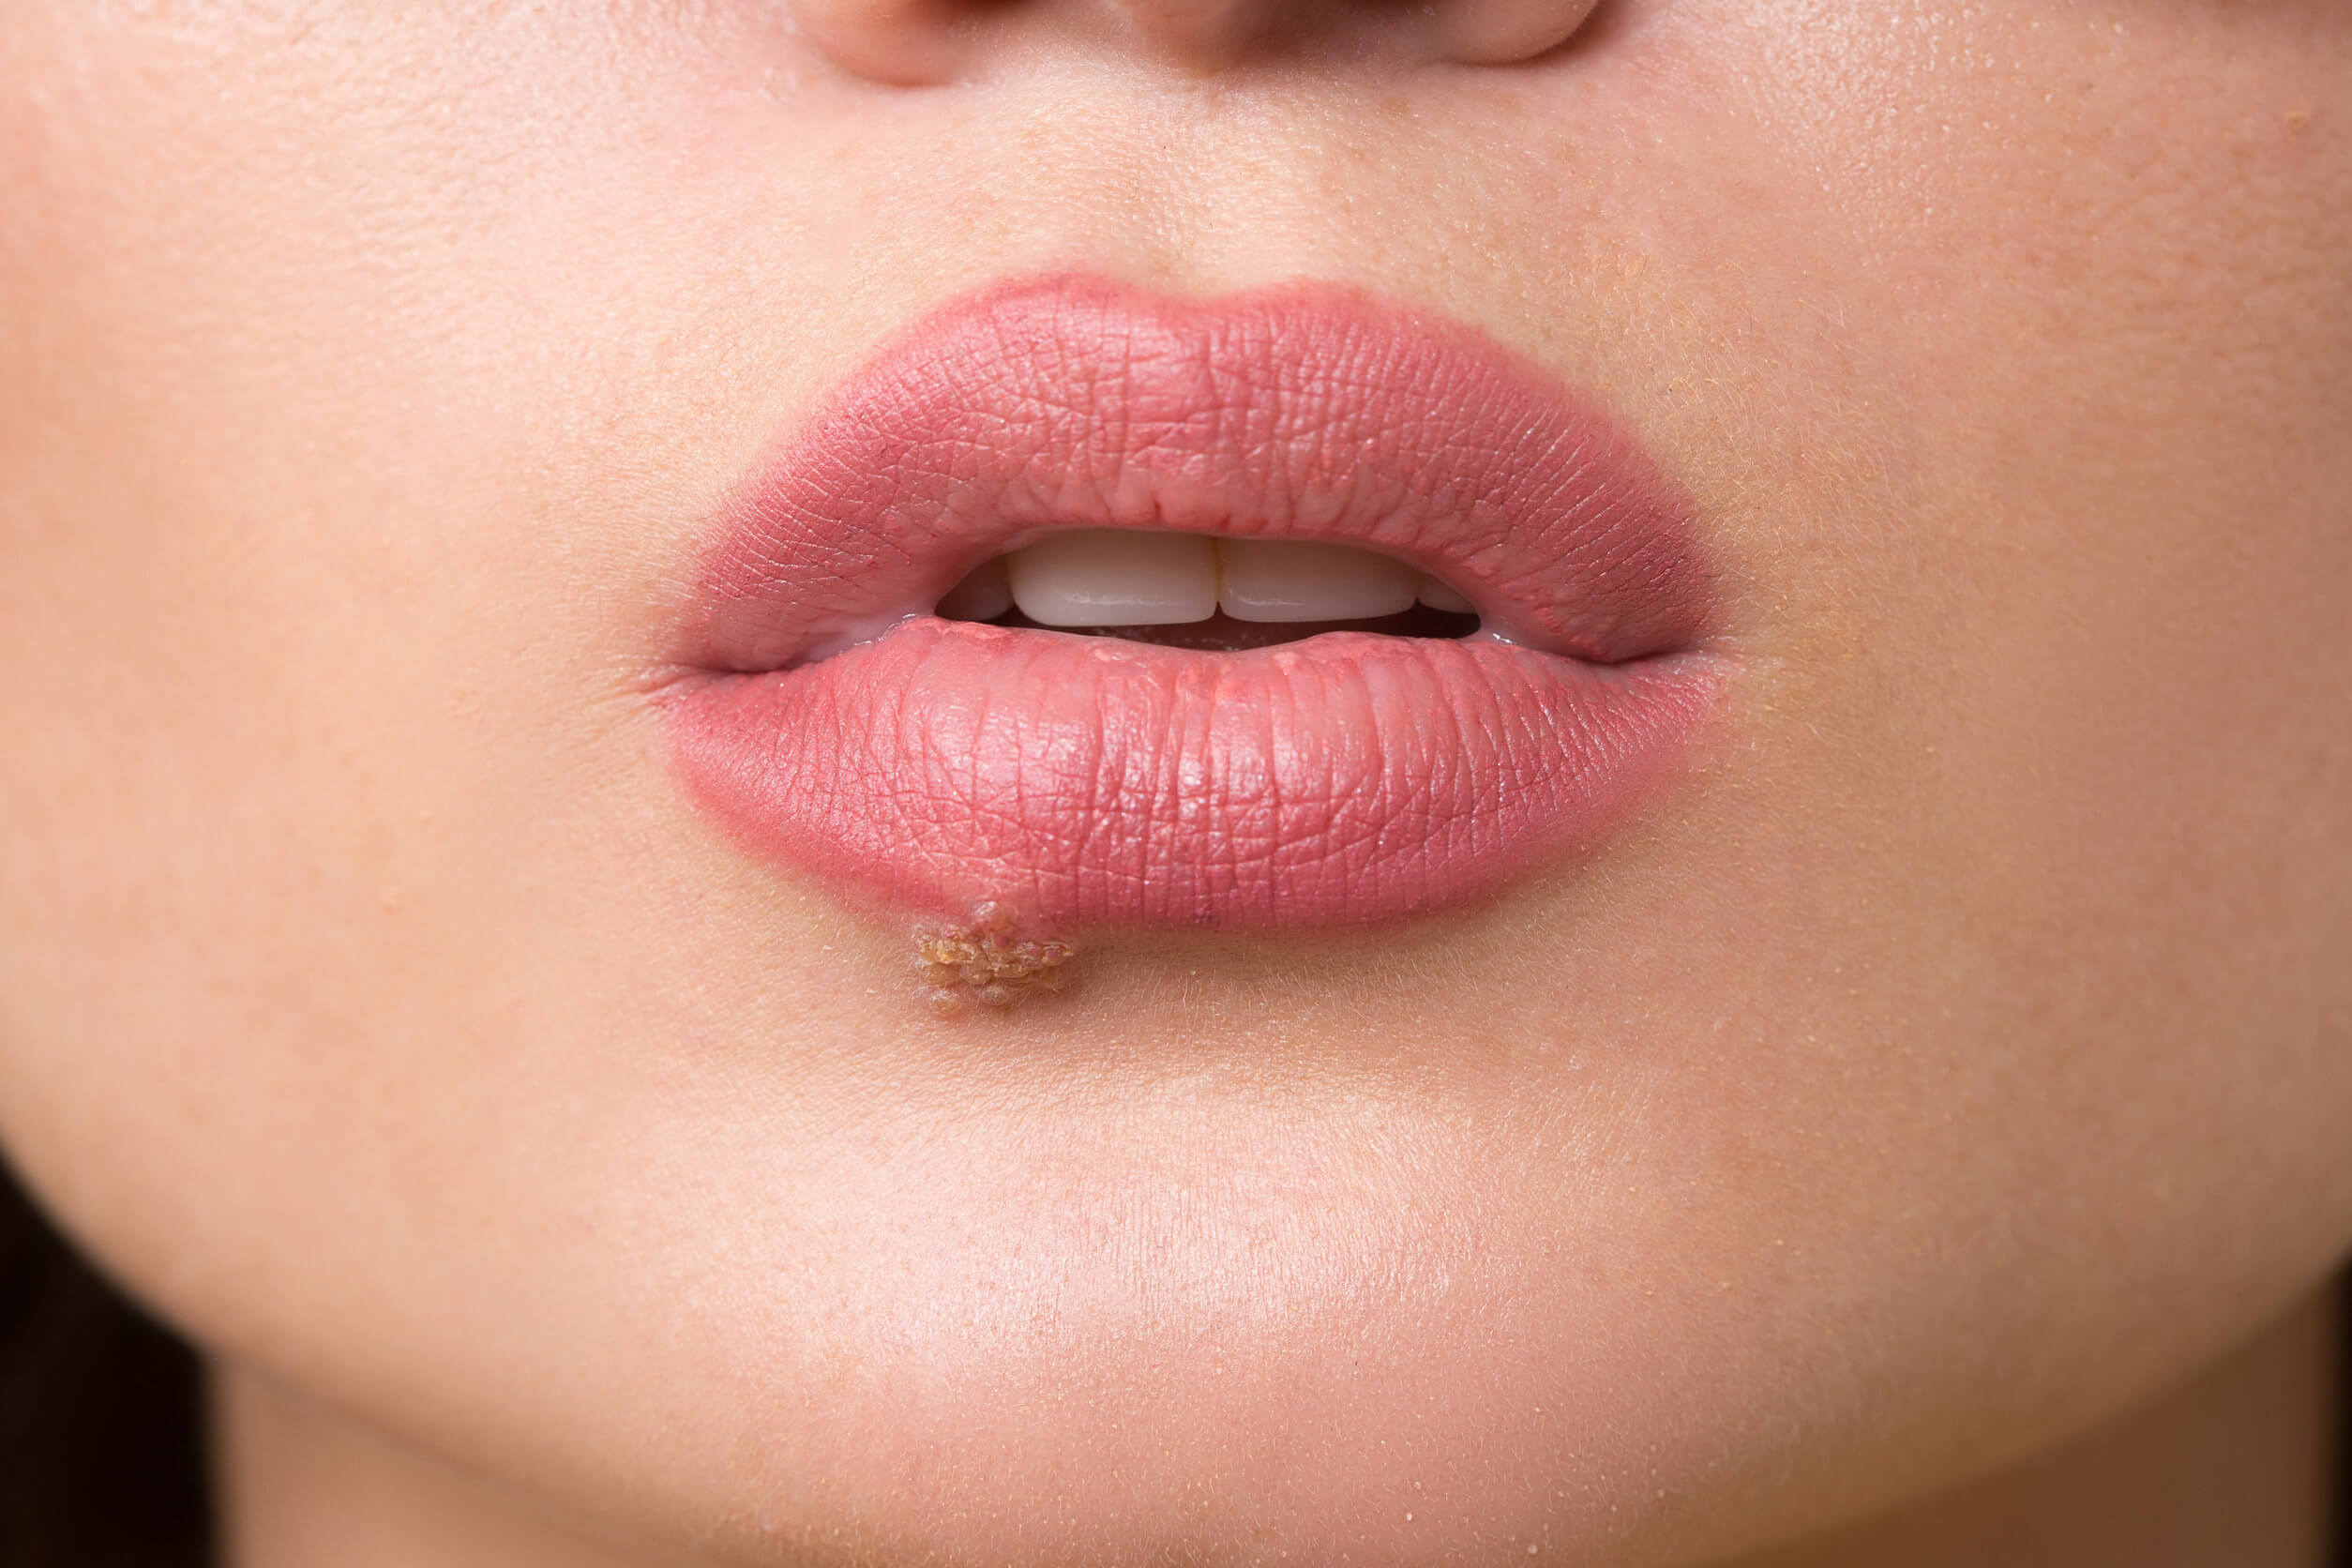 Mujer con herpes labial.